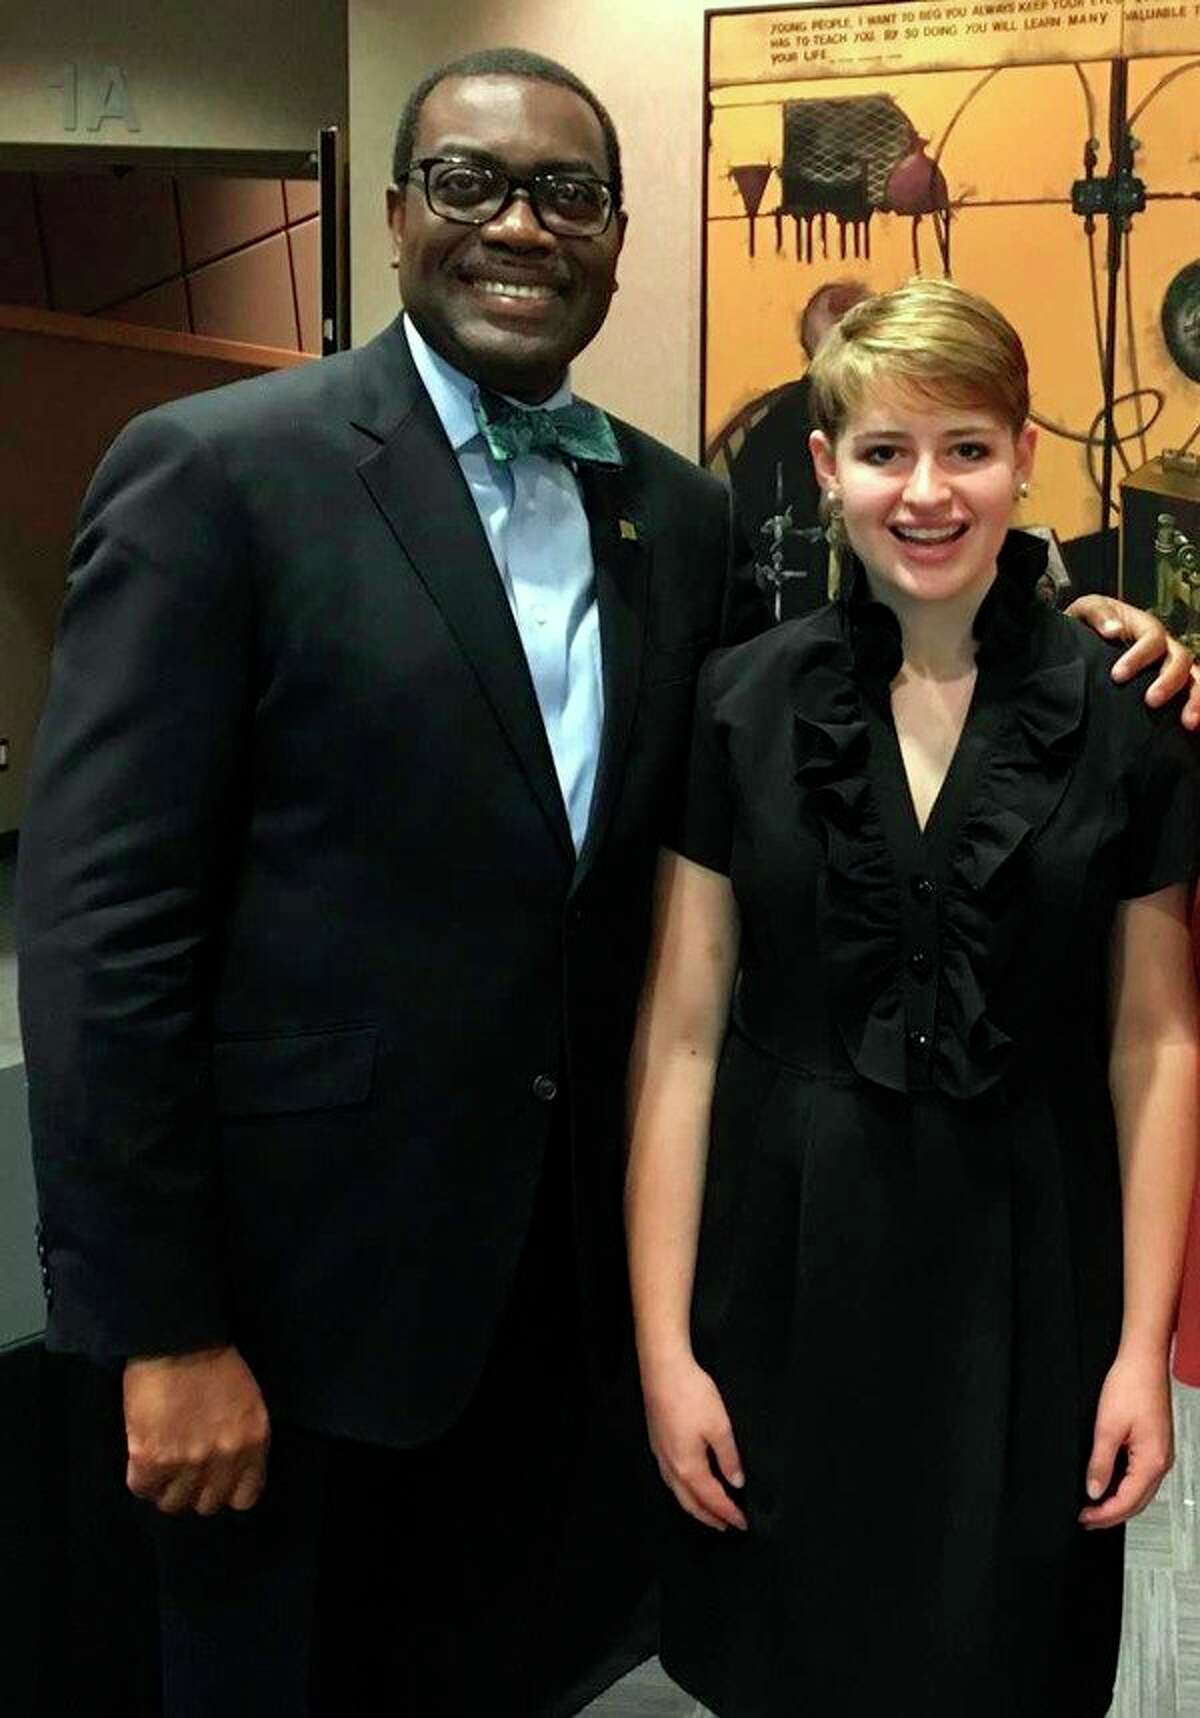 Dr. Akin Adesina, 2017 World Food Prize laureate, greets Cass City teen Addy Battel at the World Food Prize Global Youth Institute. Adesina is credited with transforming agriculture in Africa. He inspired youth with stories of growing up on a small farm in Nigeria. (Submitted Photo)